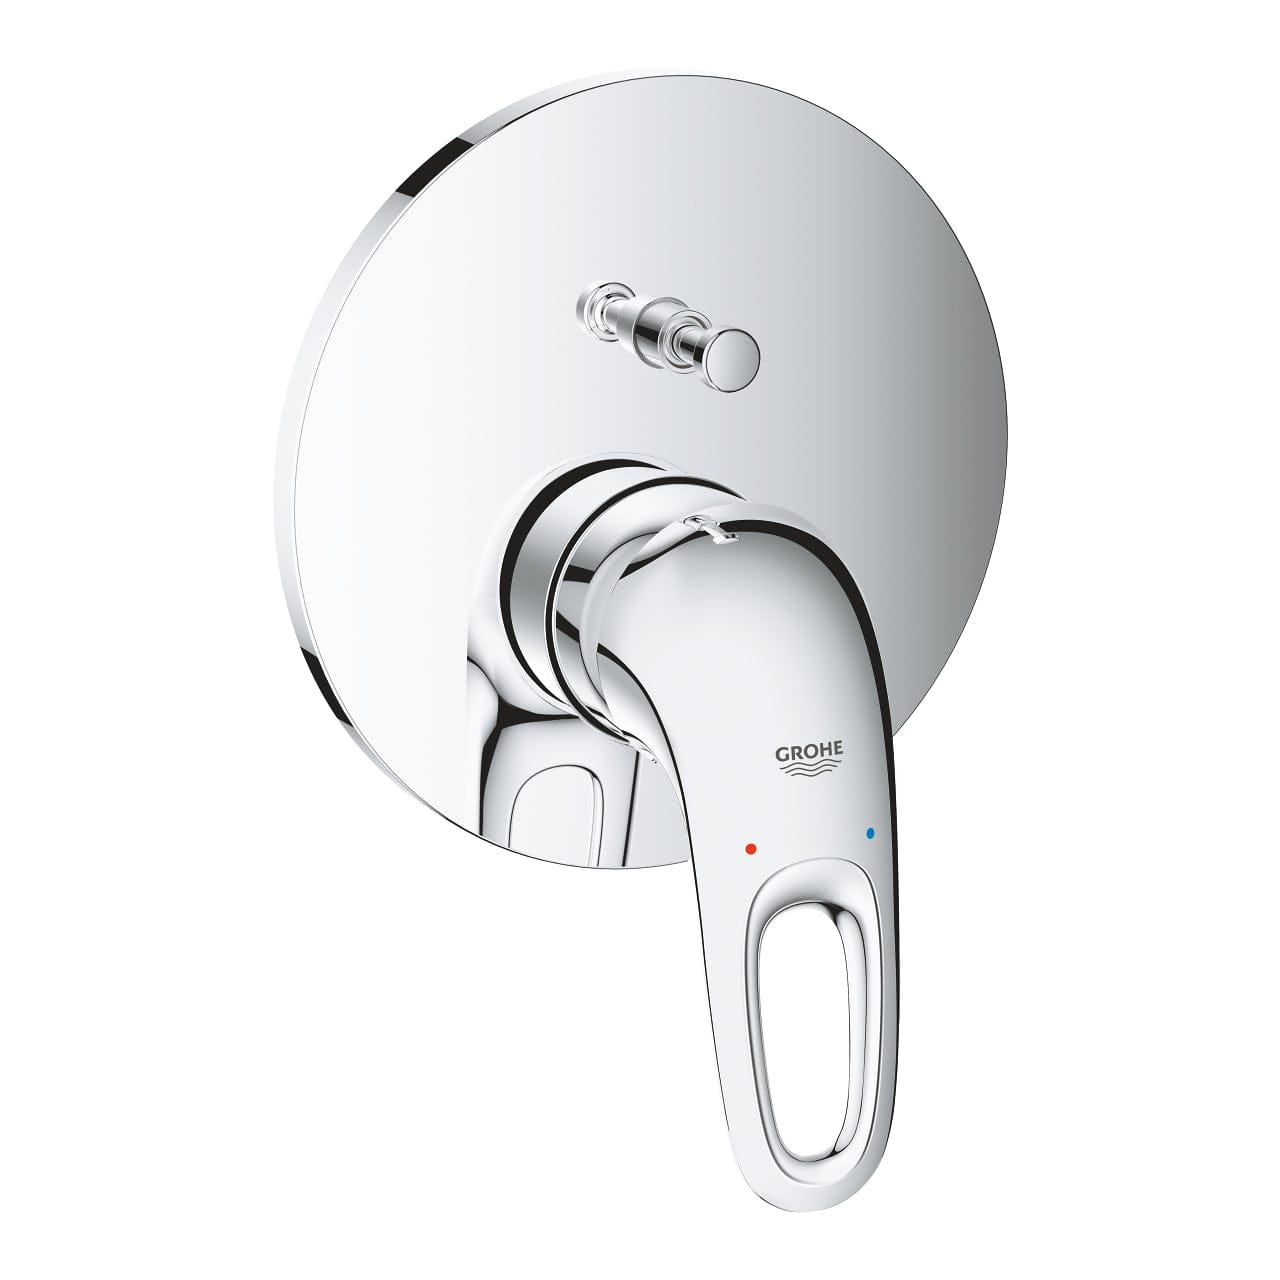 Grohe Eurostyle Single-lever Mixer with 2-way Diverter, Chrome | Supply Master | Accra, Ghana Bathroom Faucet Buy Tools hardware Building materials